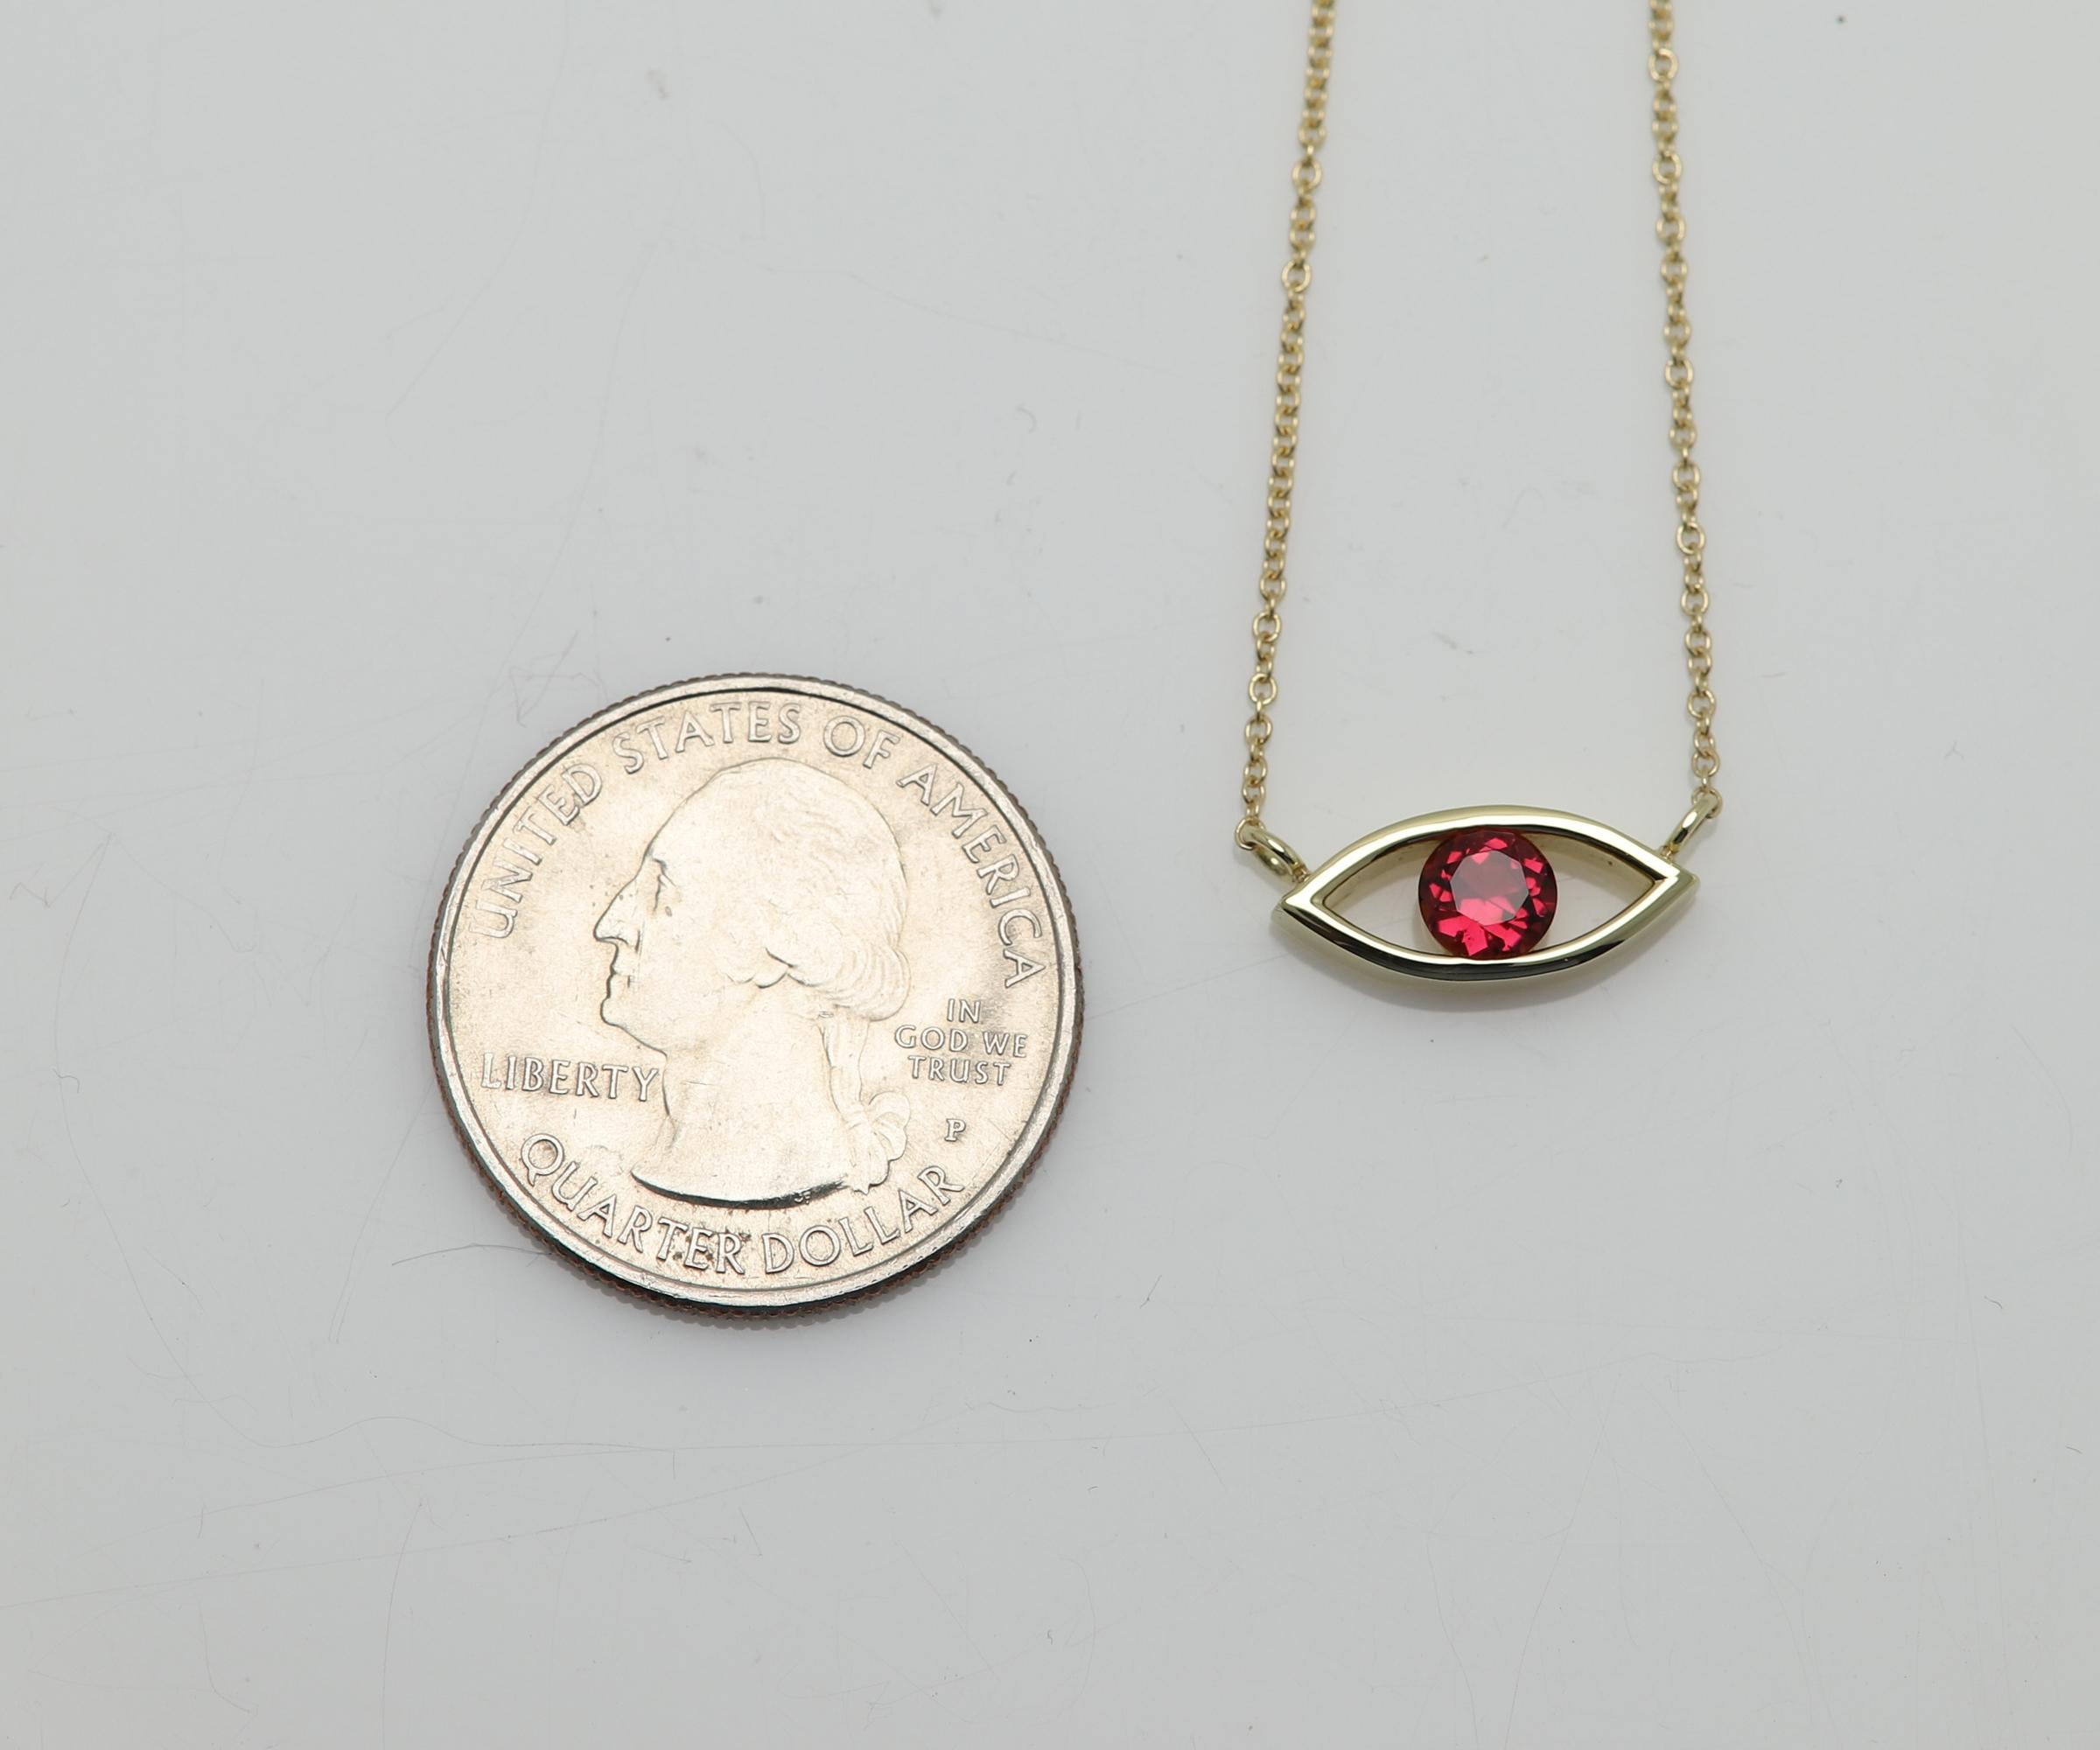 New, VERY ELEGANT  Solid 18k Yellow Gold with Natural Red Rubellite gemstone (from the tourmaline family)
Set in Yellow Gold Evil Eye Design - Good Luck / Protection !

Classic Cable Chain and Lobster Lock - all 18k, 
Chain Length total is 16.5'